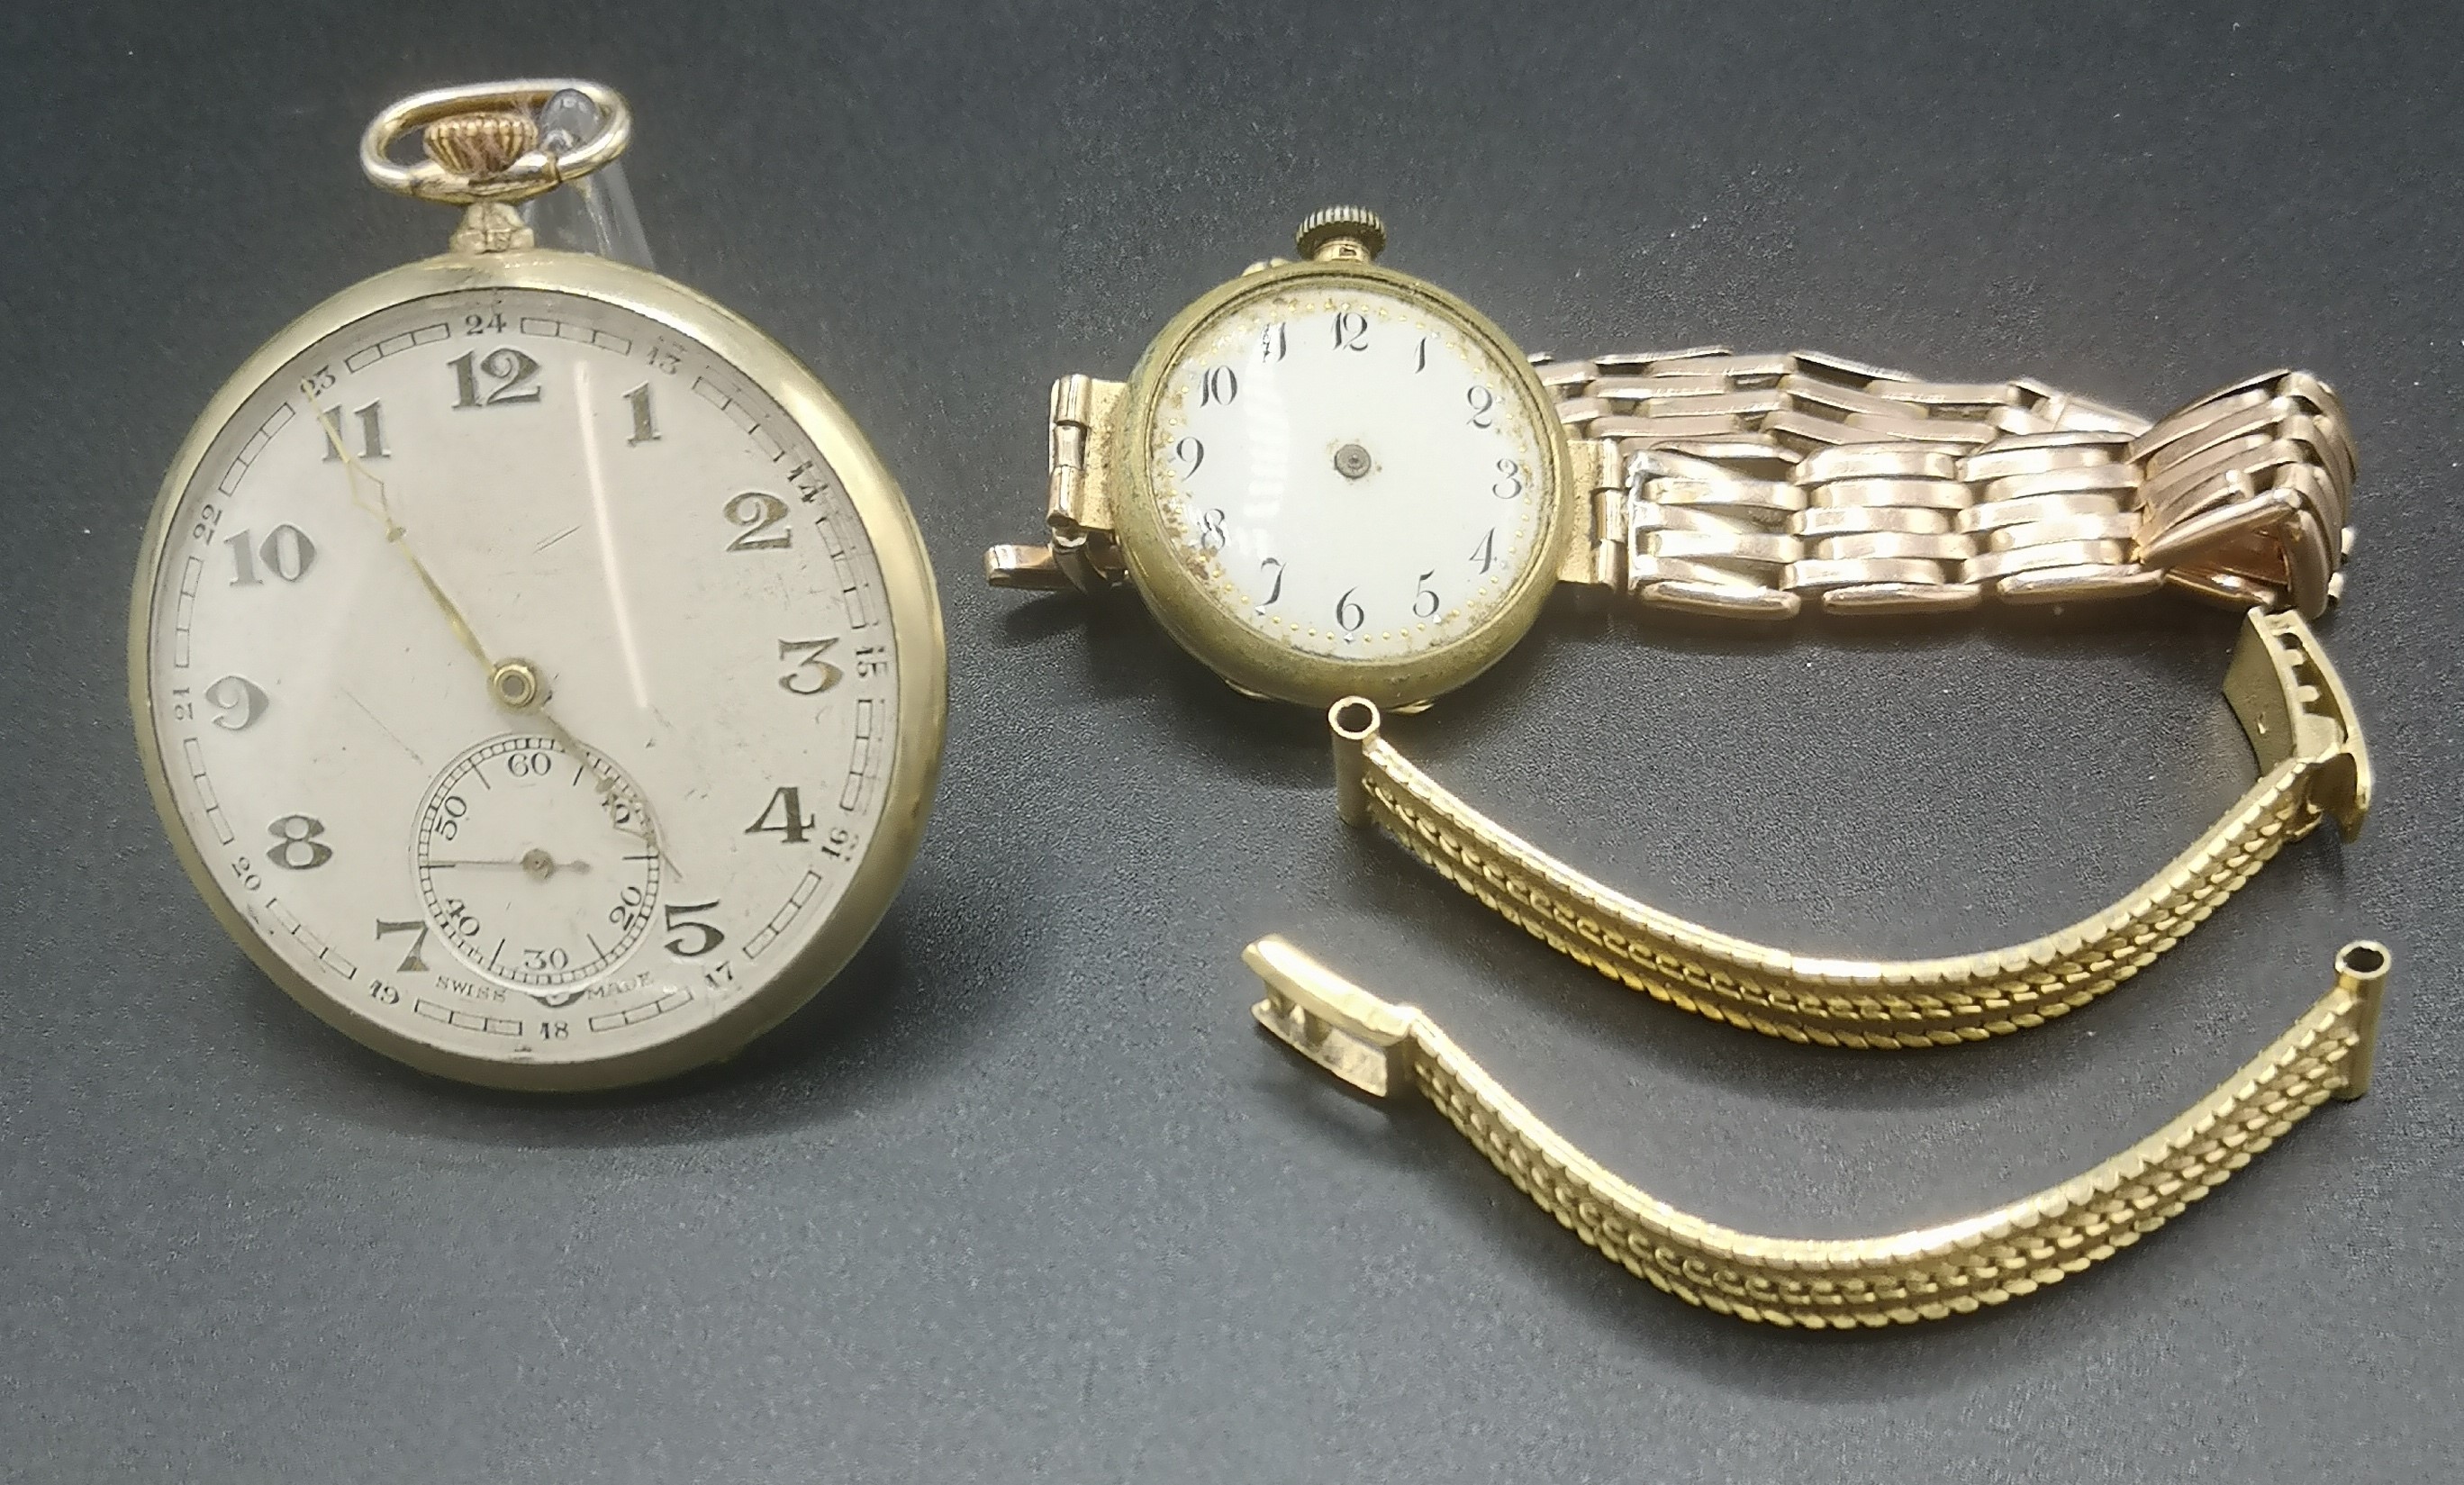 18ct gold case wrist watch together with a Swiss made wrist watch